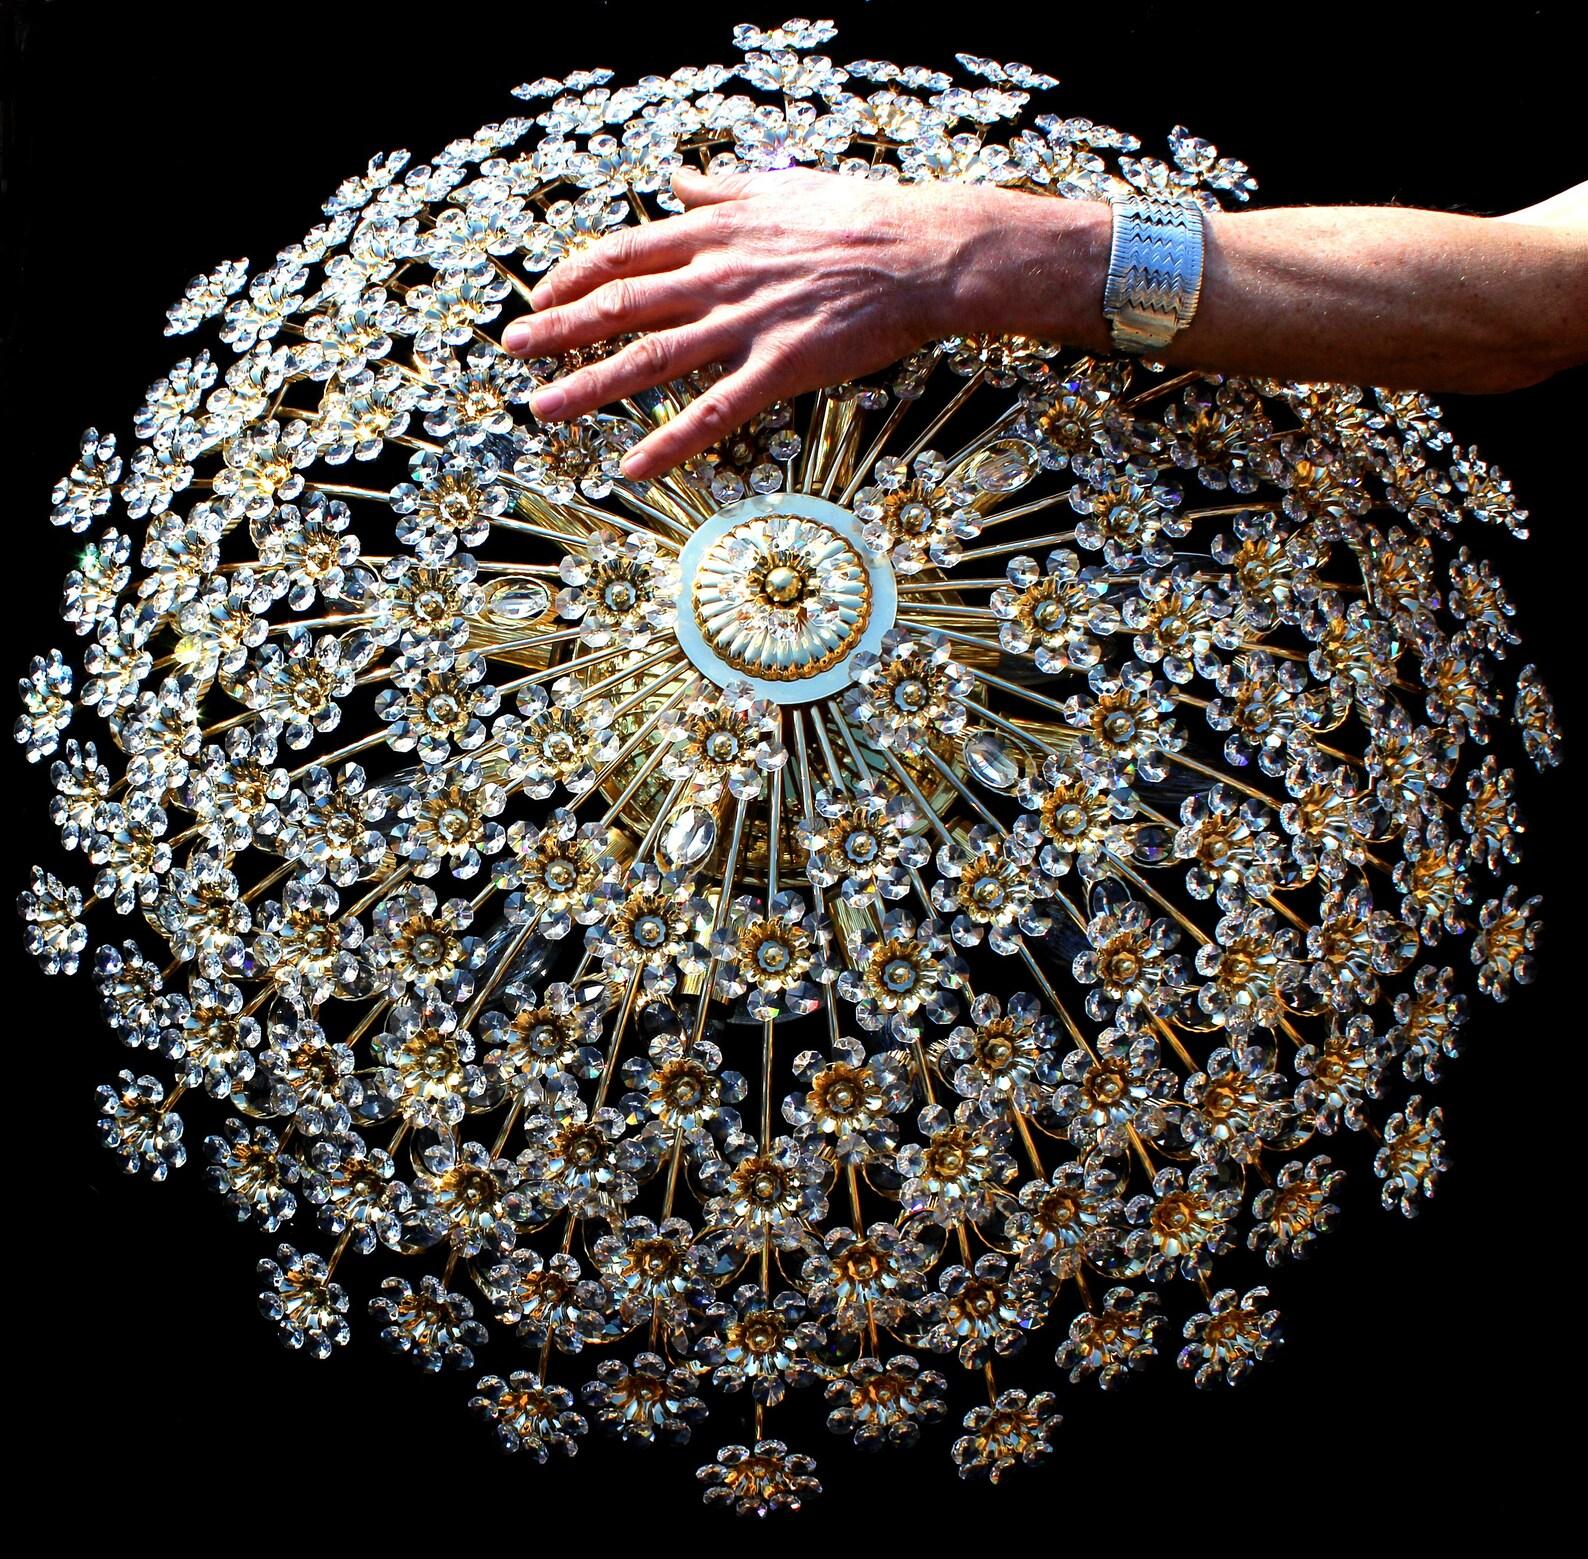 Palme & Walter gigantic gilt plafoniere 1960's. 

Gilded brass with 141 flowers, more than 1.000 hand-cutted lead crystal pieces

15 Lights e14 , diameter 31 inches, original height 14 inches

The lighting manufacturer PALME & WALTER had in